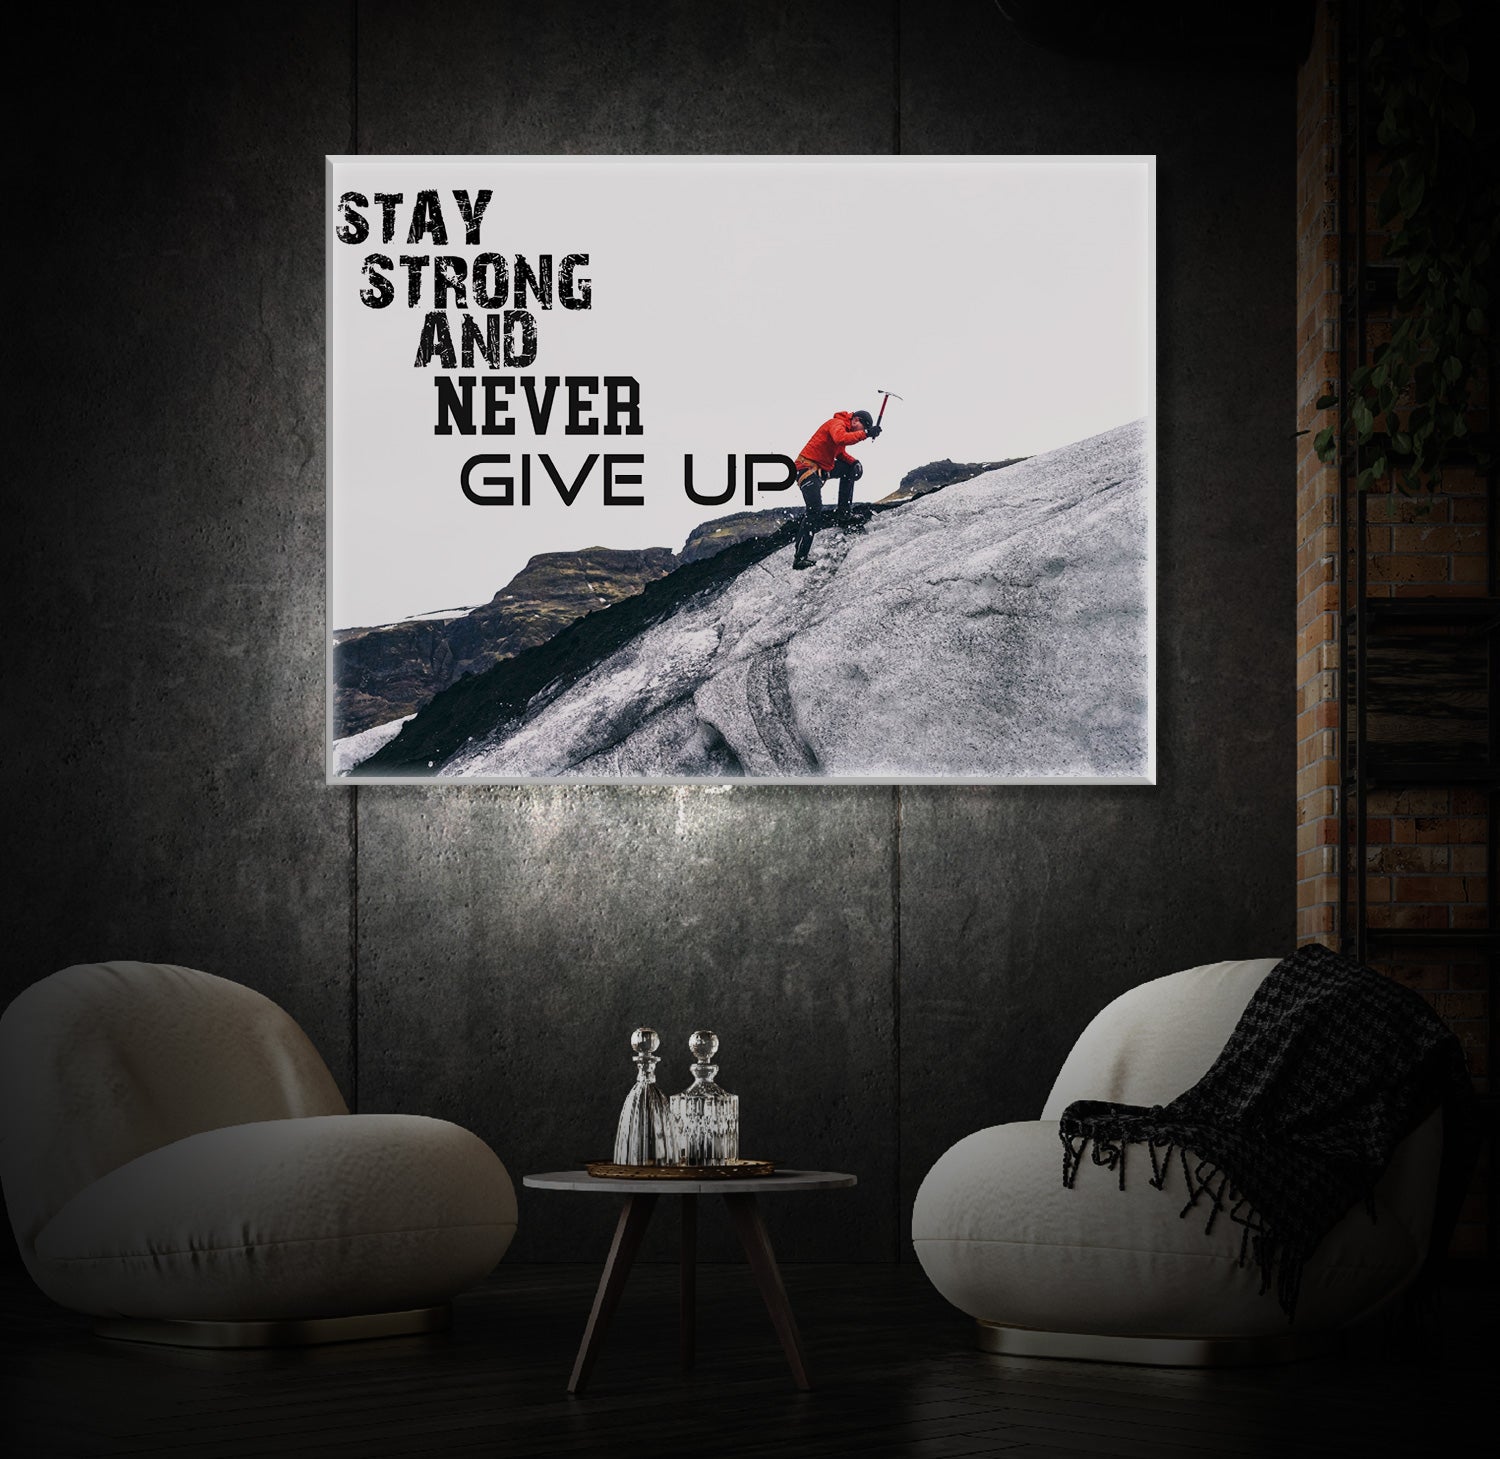 " Stay Strong and Never Give Up" LED Leuchtbild